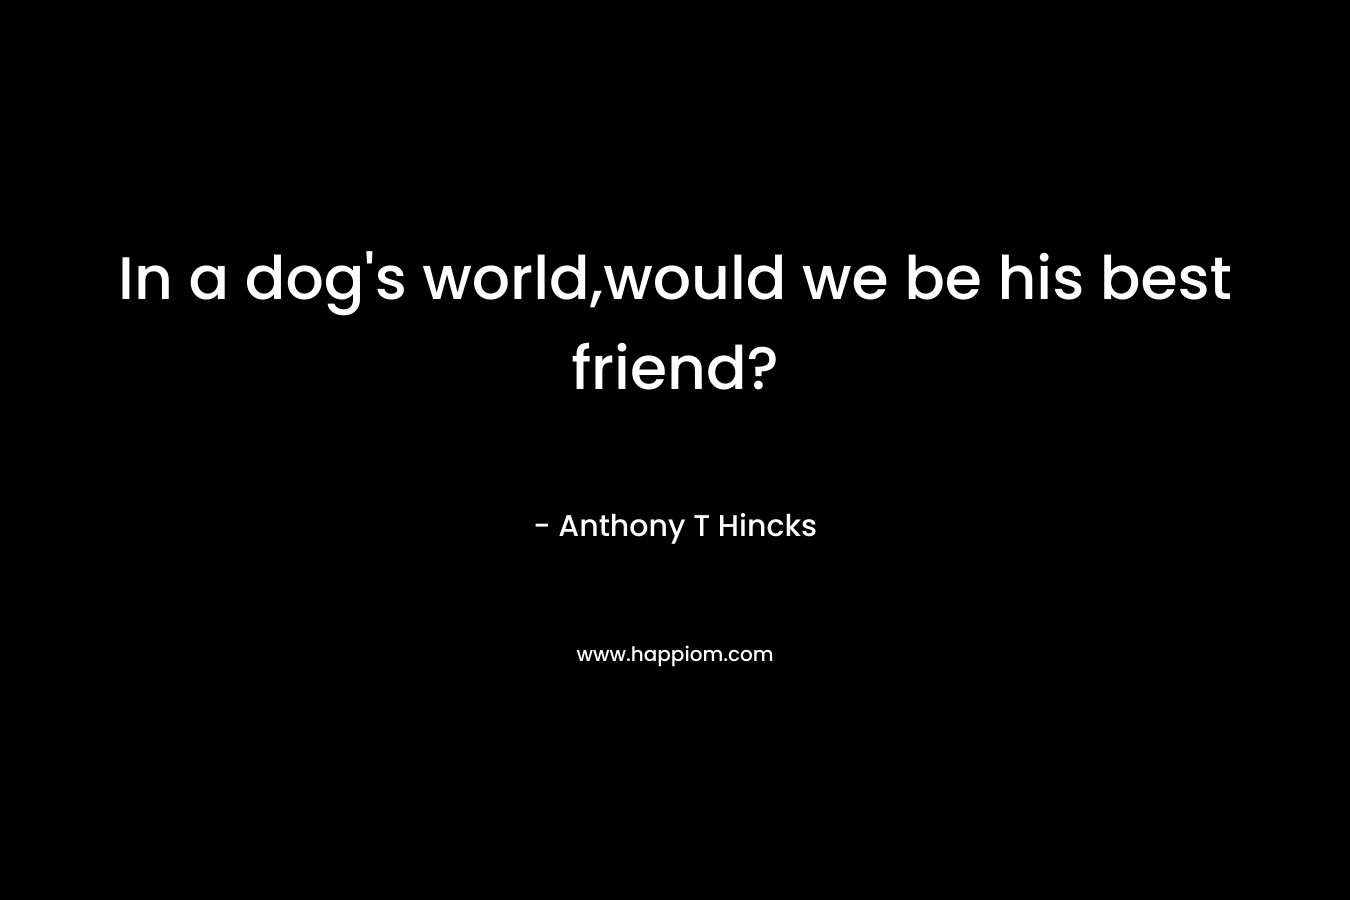 In a dog’s world,would we be his best friend? – Anthony T Hincks